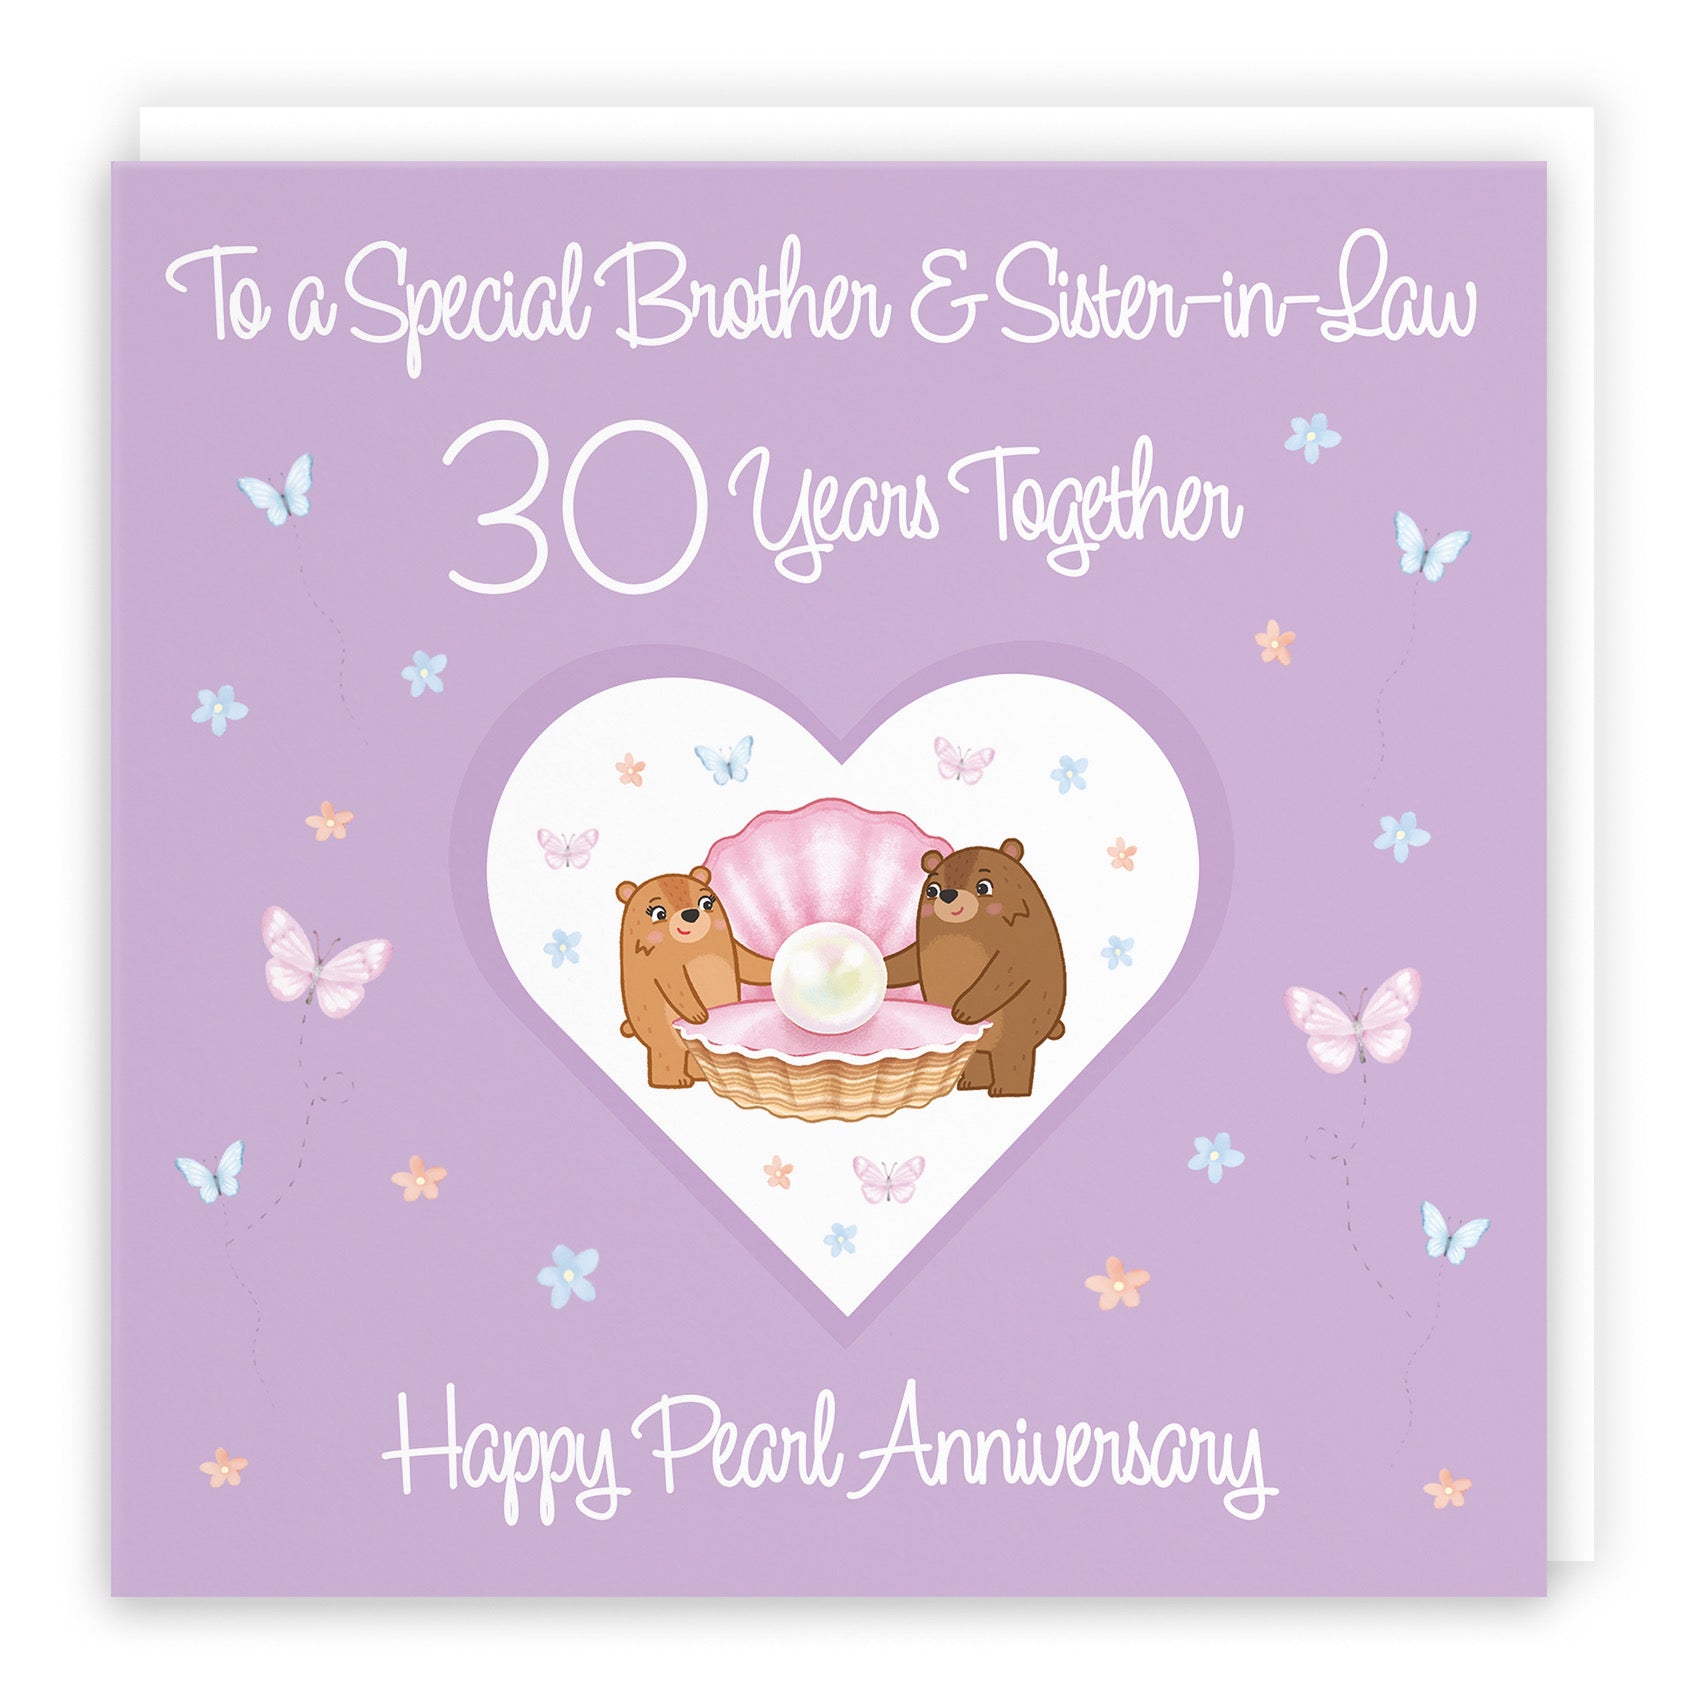 Large Brother & Sister-in-Law 30th Anniversary Card Romantic Meadows - Default Title (B0CXY4CDYM)